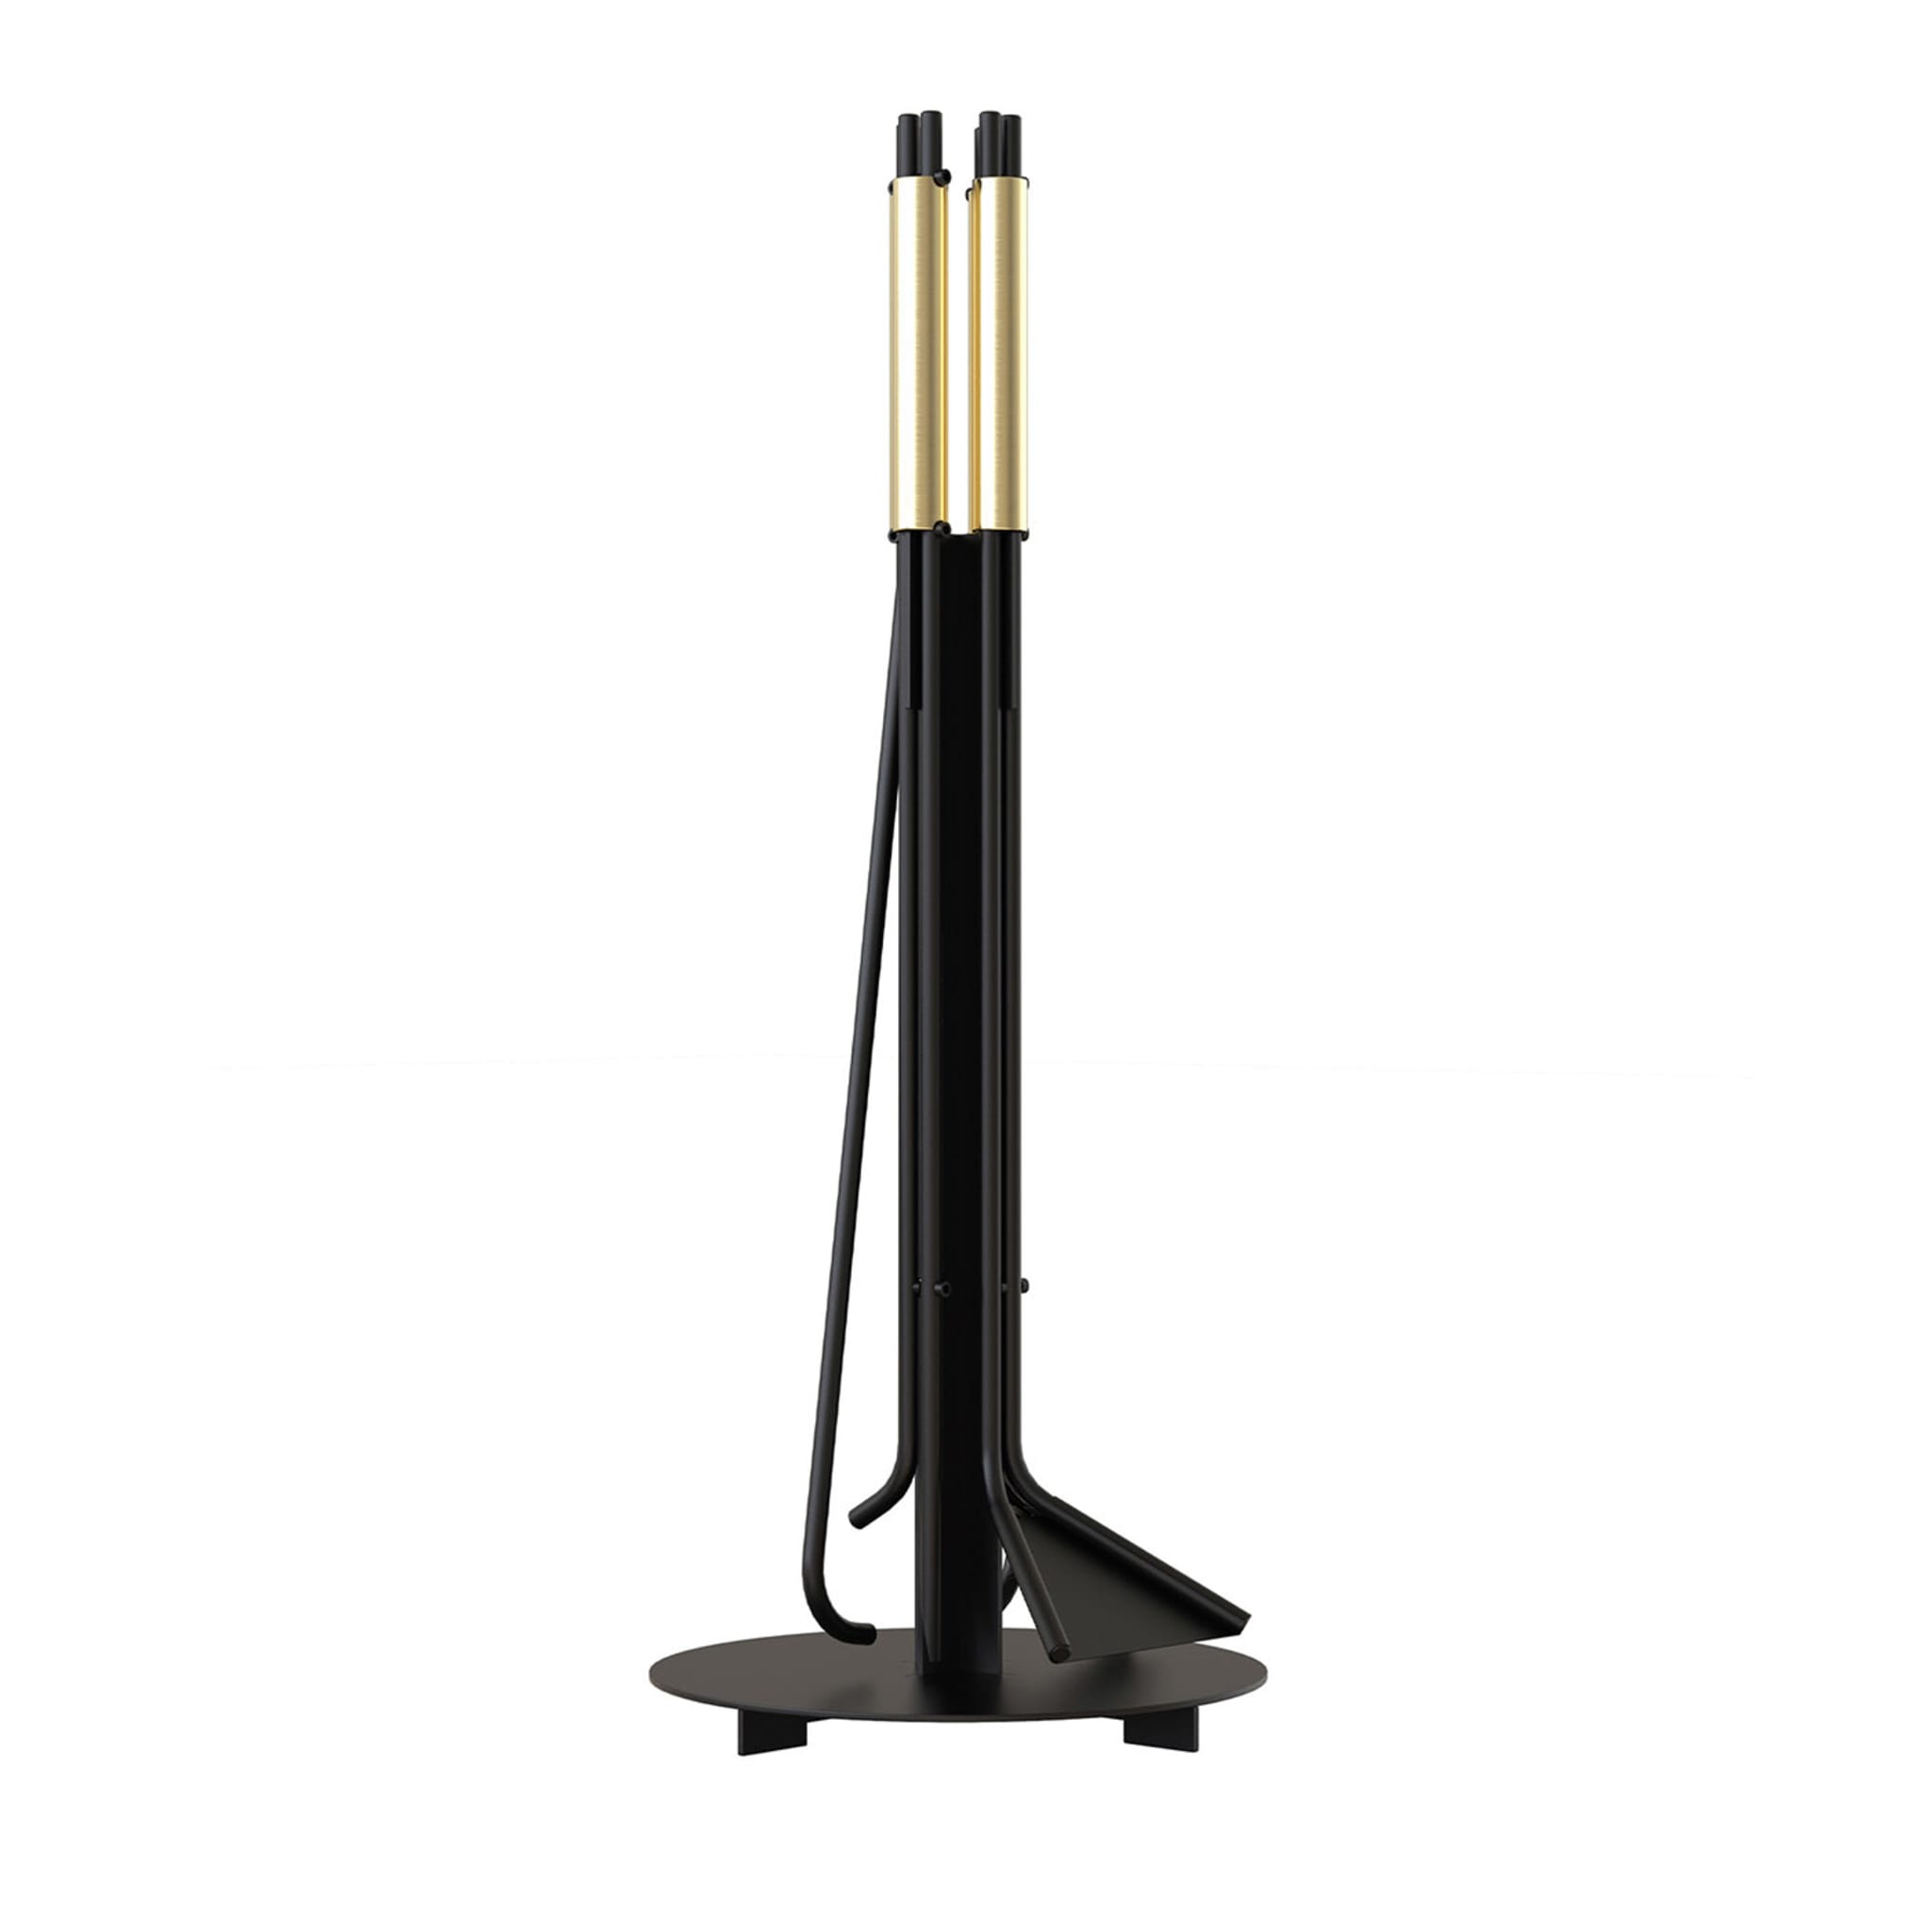 ED001 Black and Brass Fireplace Tools - Main view